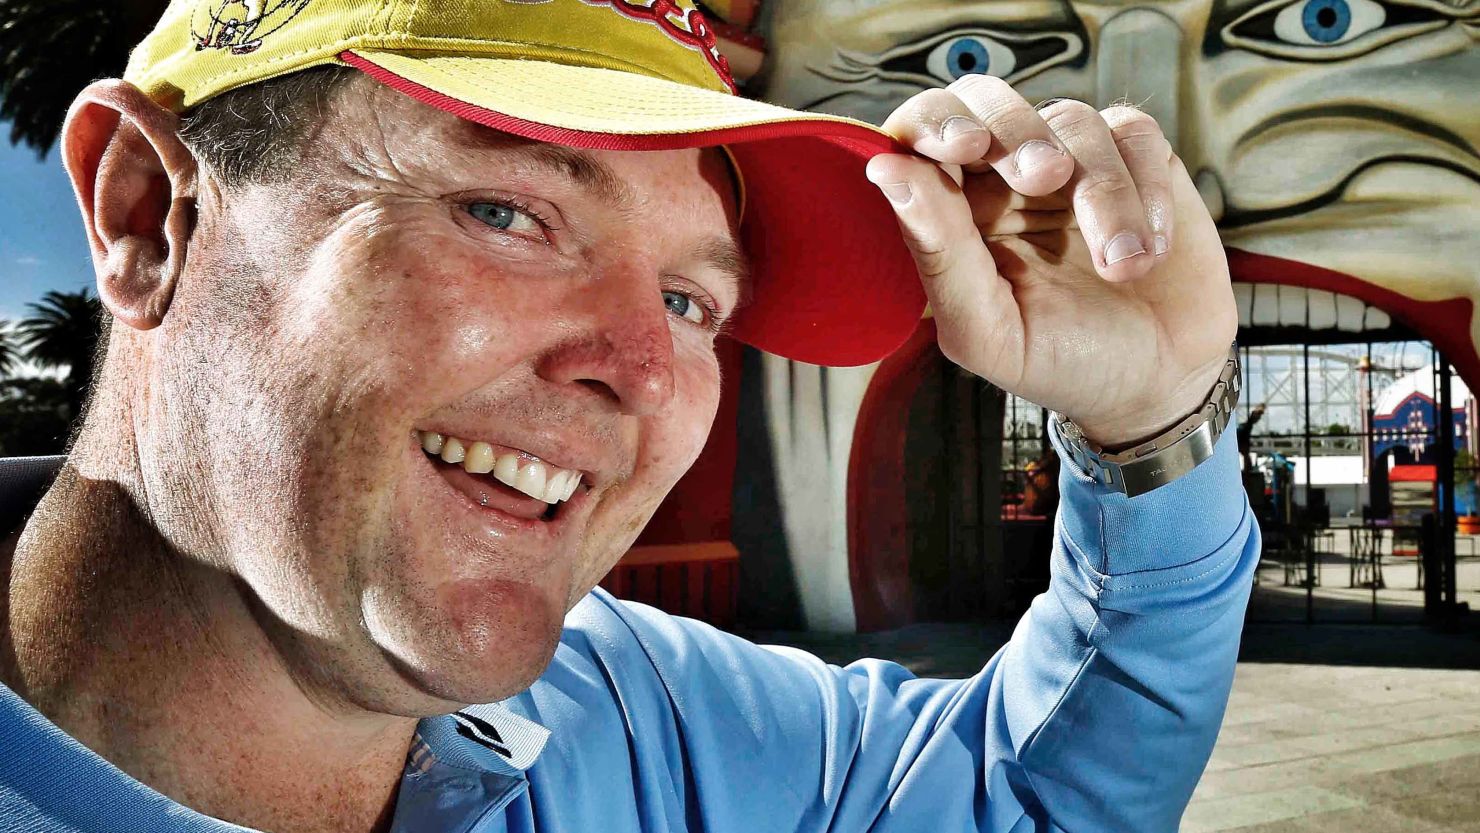 Australian golfer Jarrod Lyle had died aged 36 after a long battle with cancer